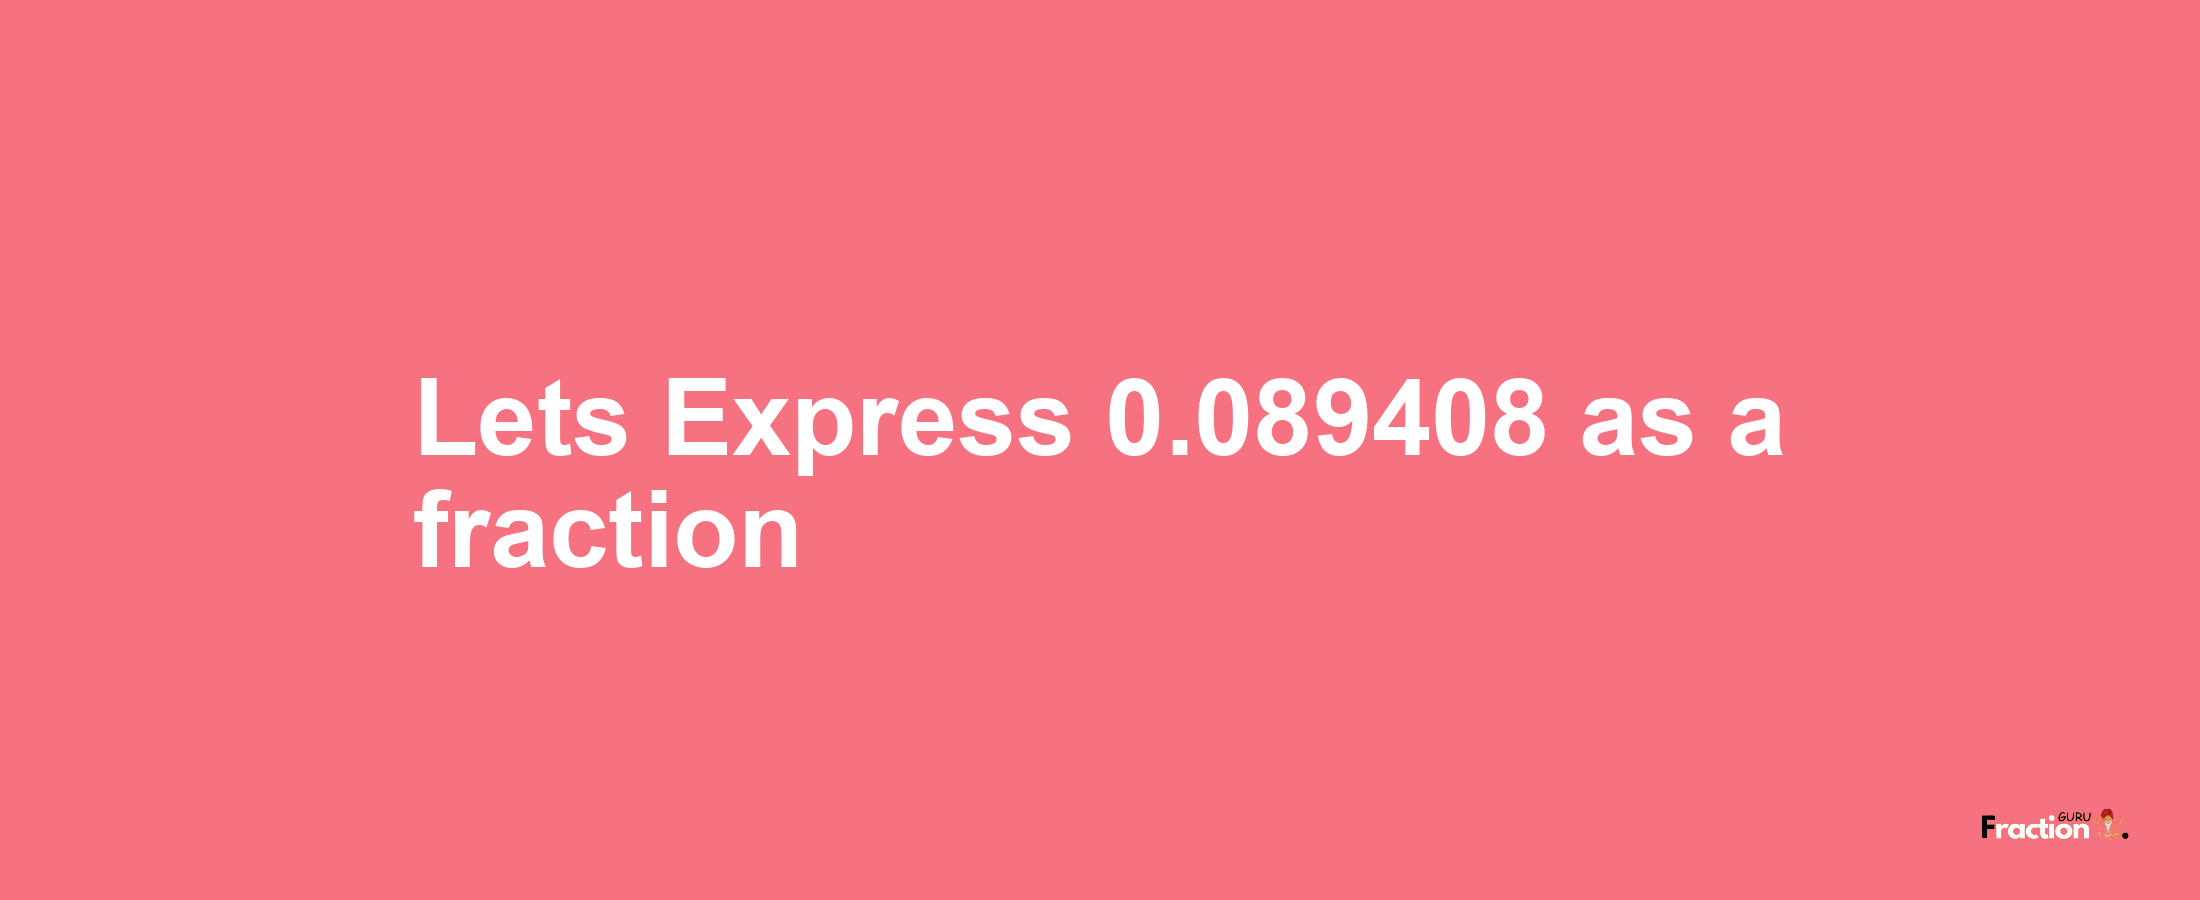 Lets Express 0.089408 as afraction